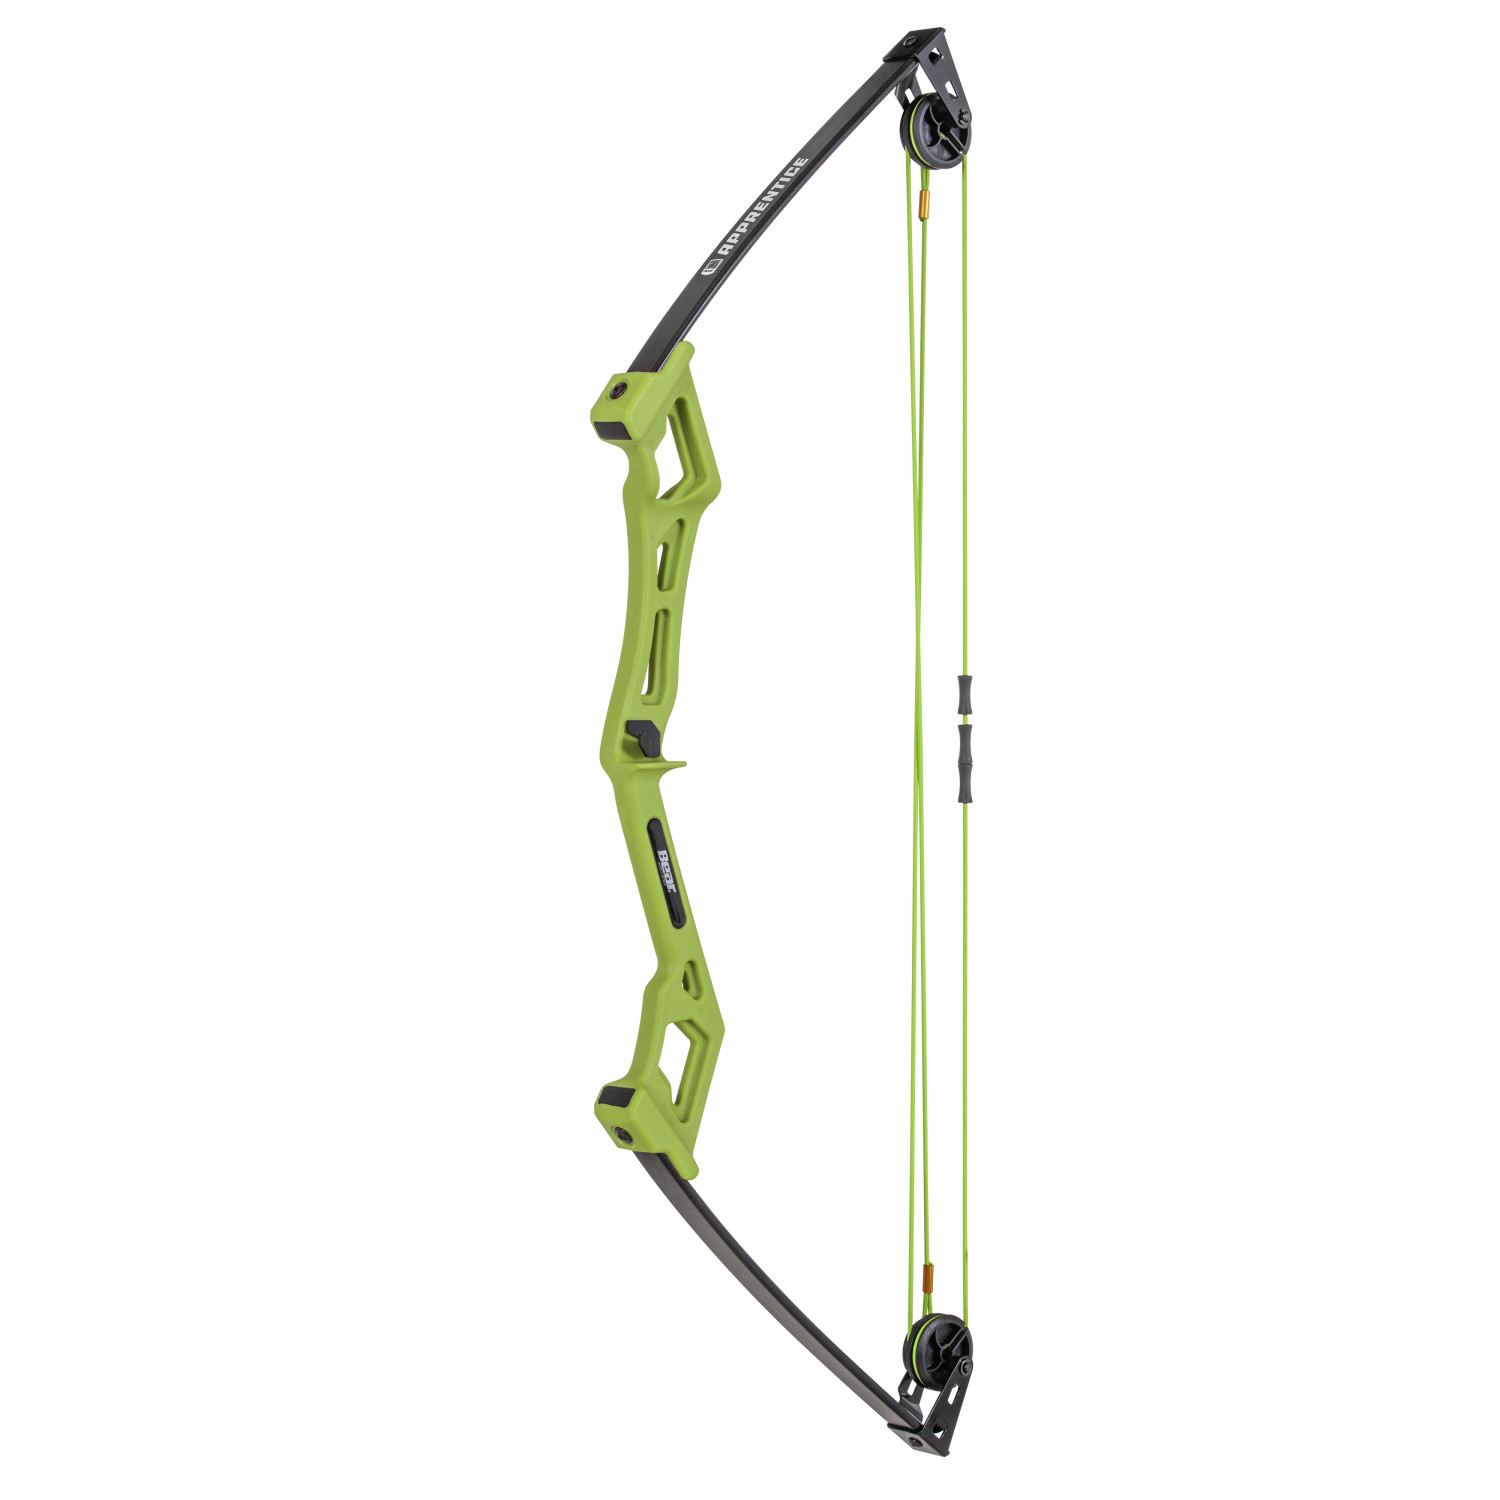 Bear Archery Apprentice Youth Bow Set Featuring 6-13.5 lb. Draw Weight and 13- to 24-inch Draw Length Range and 27” Axle-to-Axle Right-Handed Bow with Composite Limbs - image 2 of 10